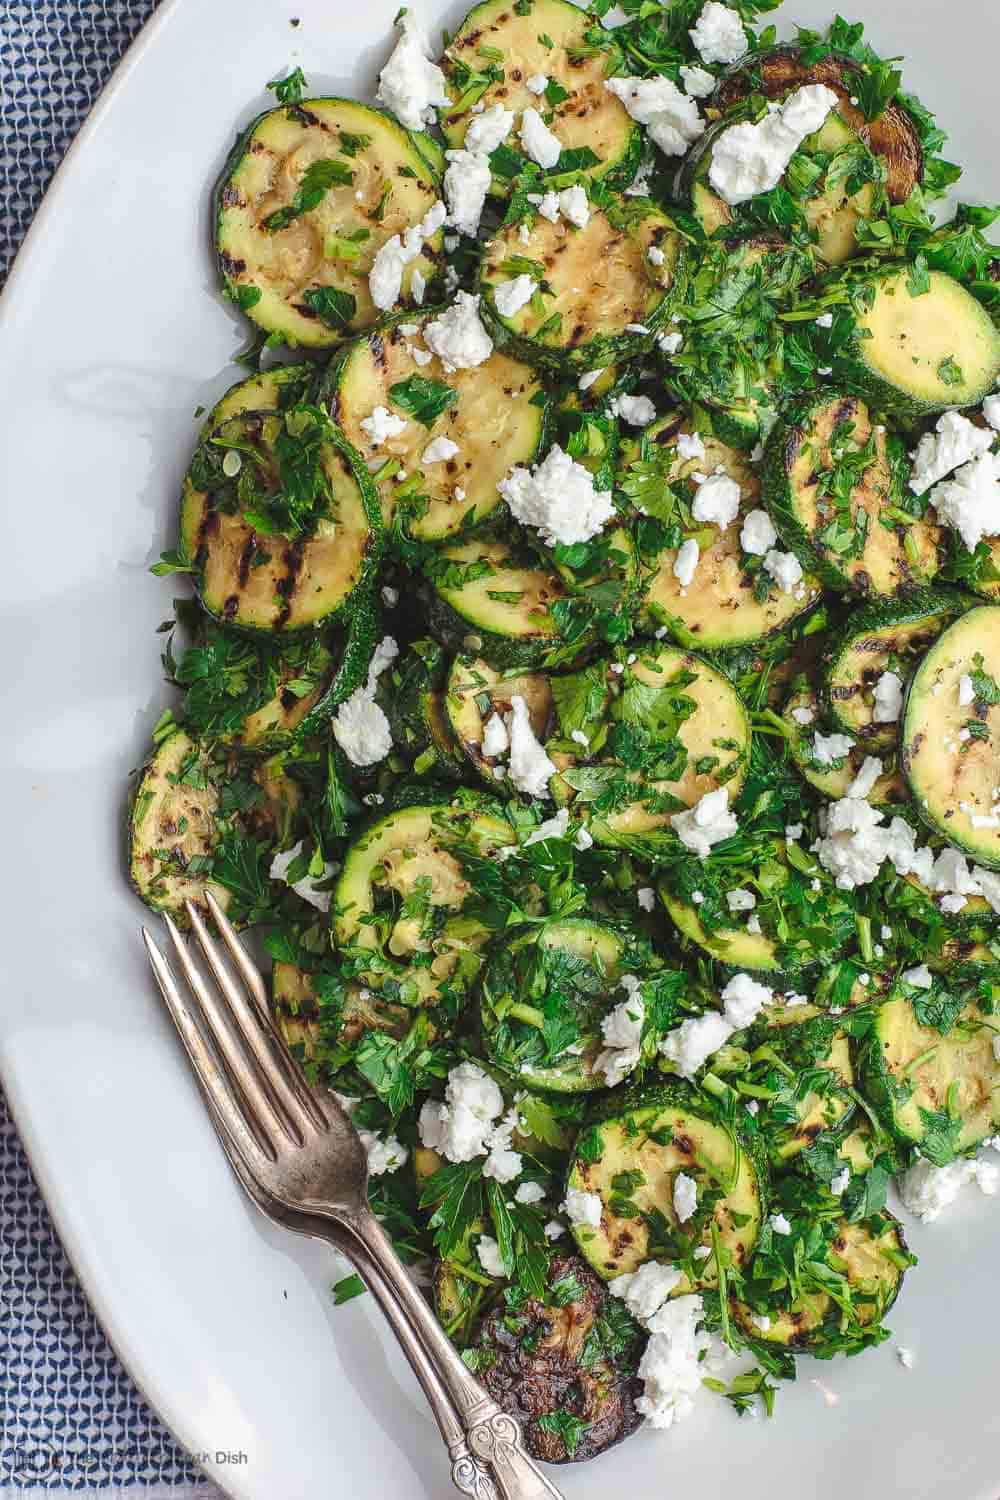 Mediterranean Style Grilled Zucchini Salad | The Mediterranean Dish. Simple, flavor-packed grilled zucchini with fresh herbs and other Mediterranean favorites. Ready in 15 minutes. Recipe from TheMediterraneanDish.com